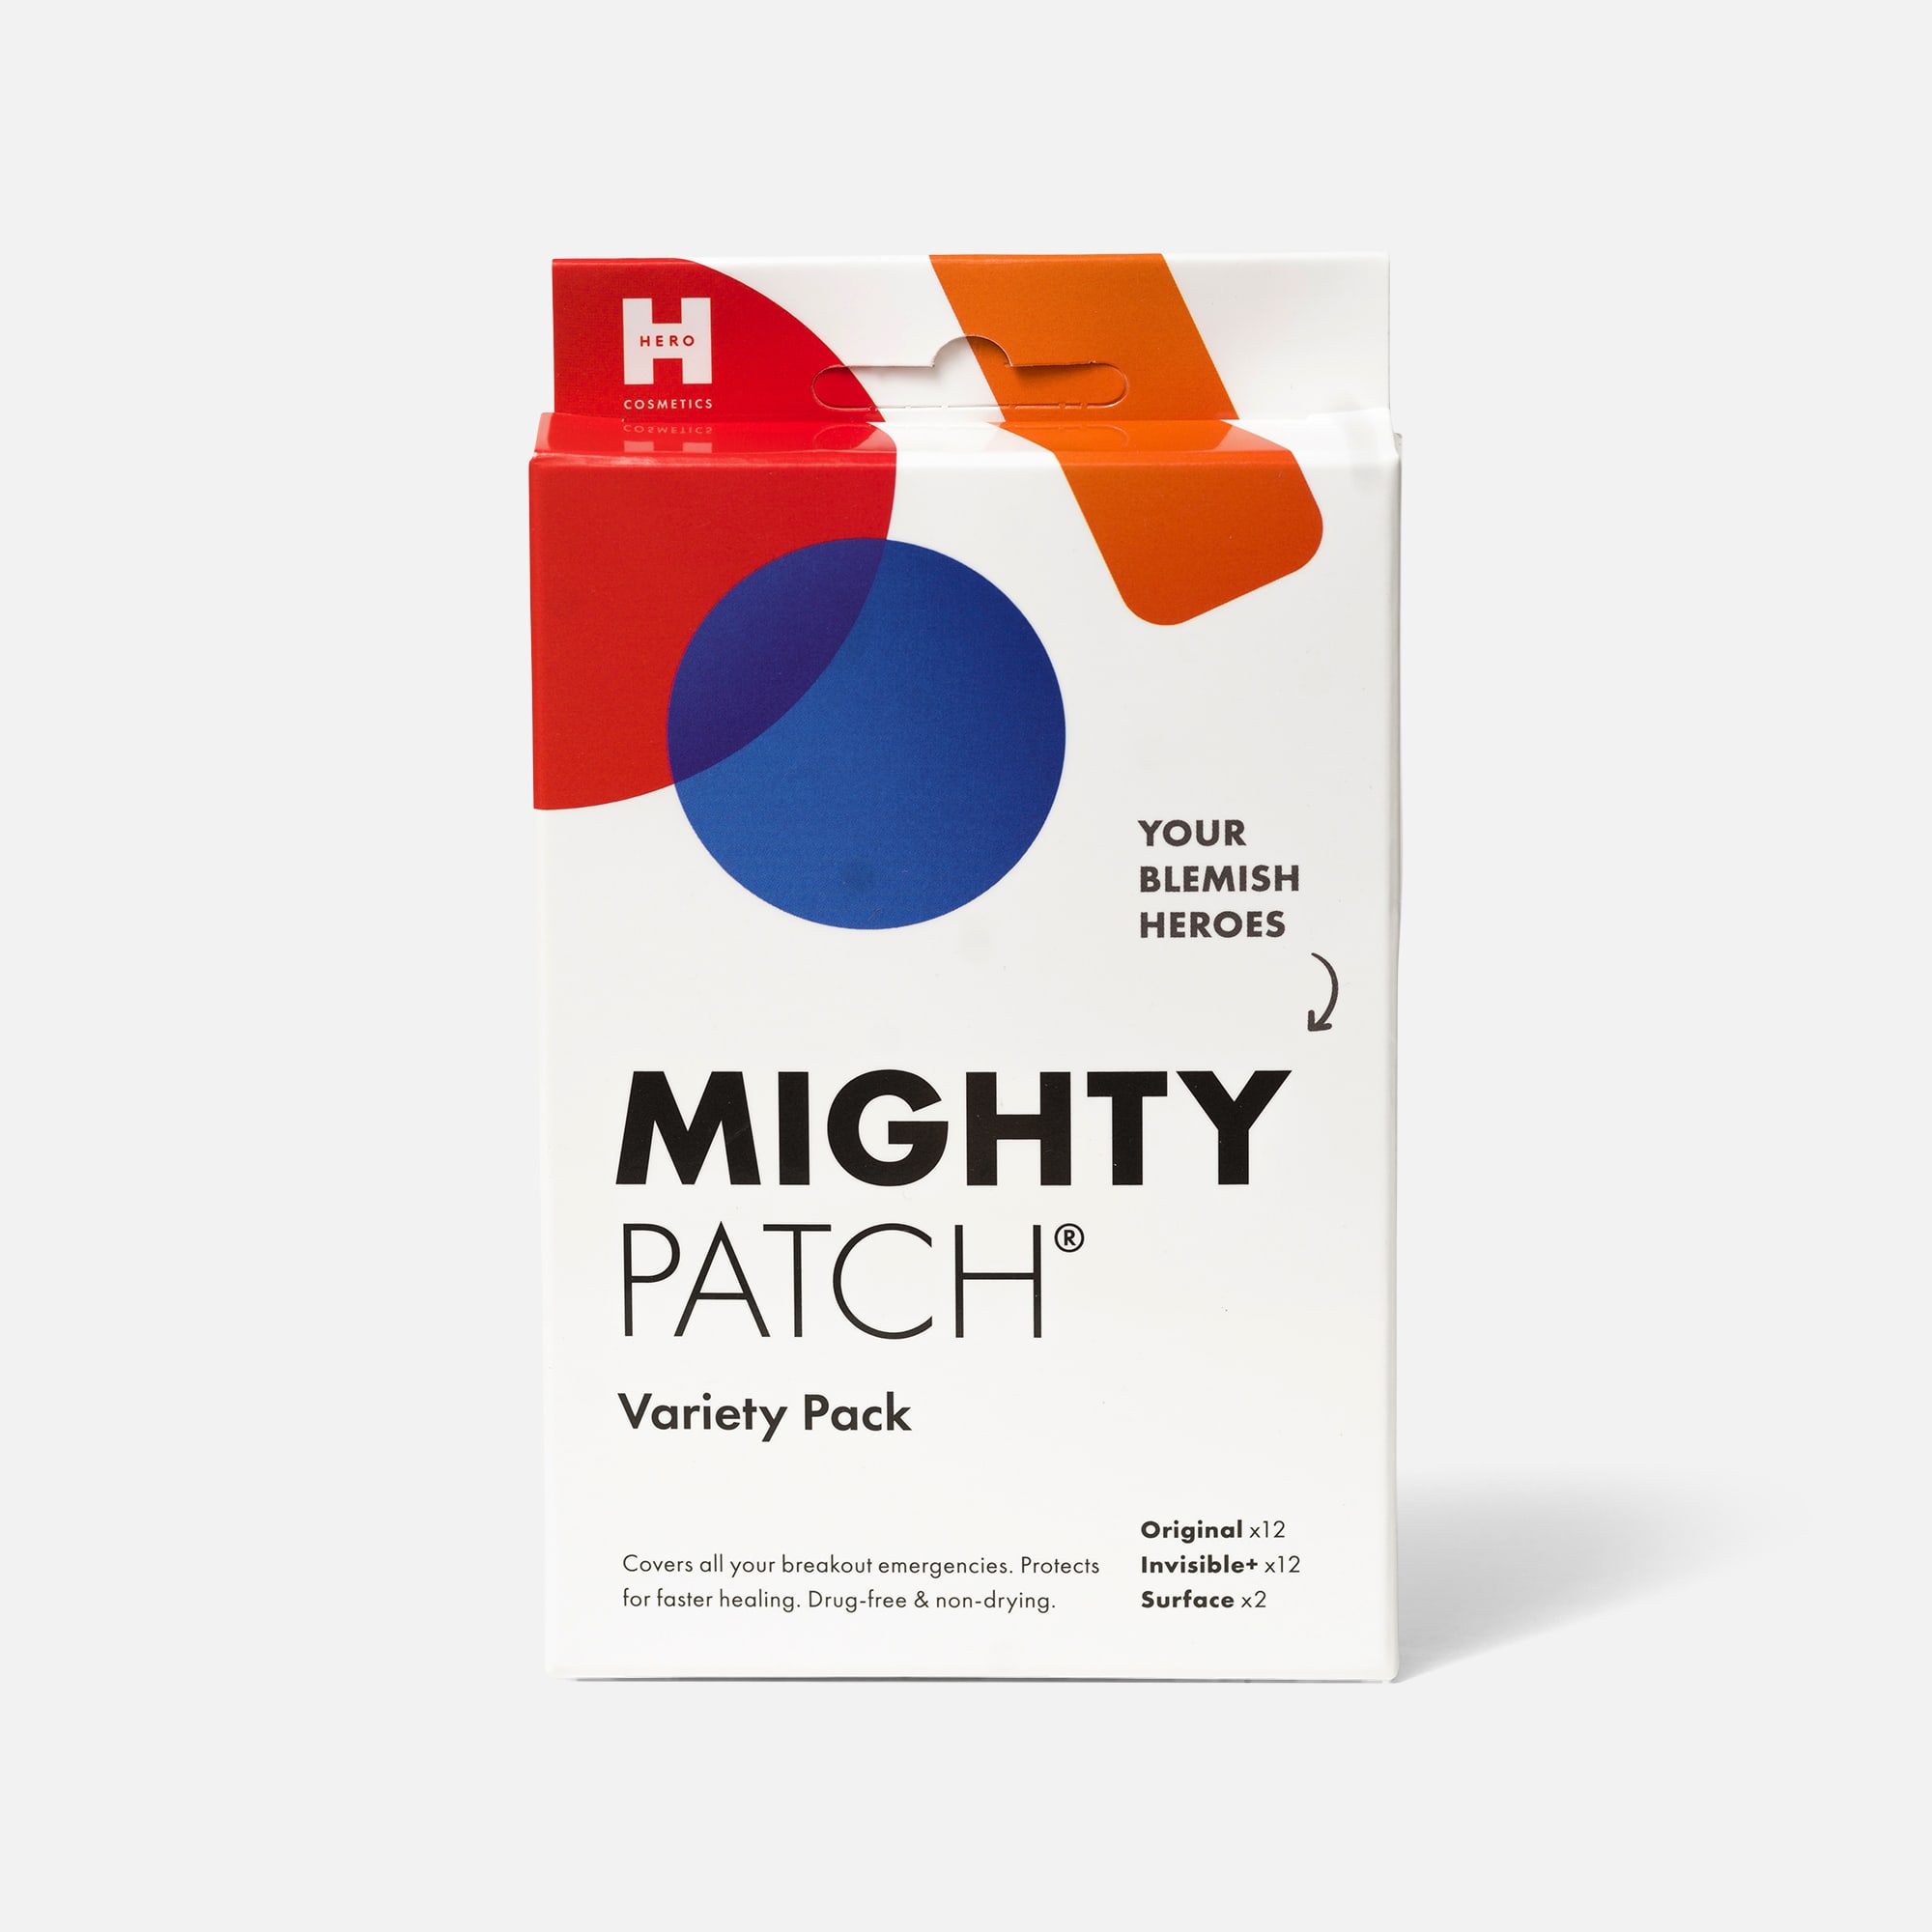 The Mighty Patch Review - The Dermatology Review